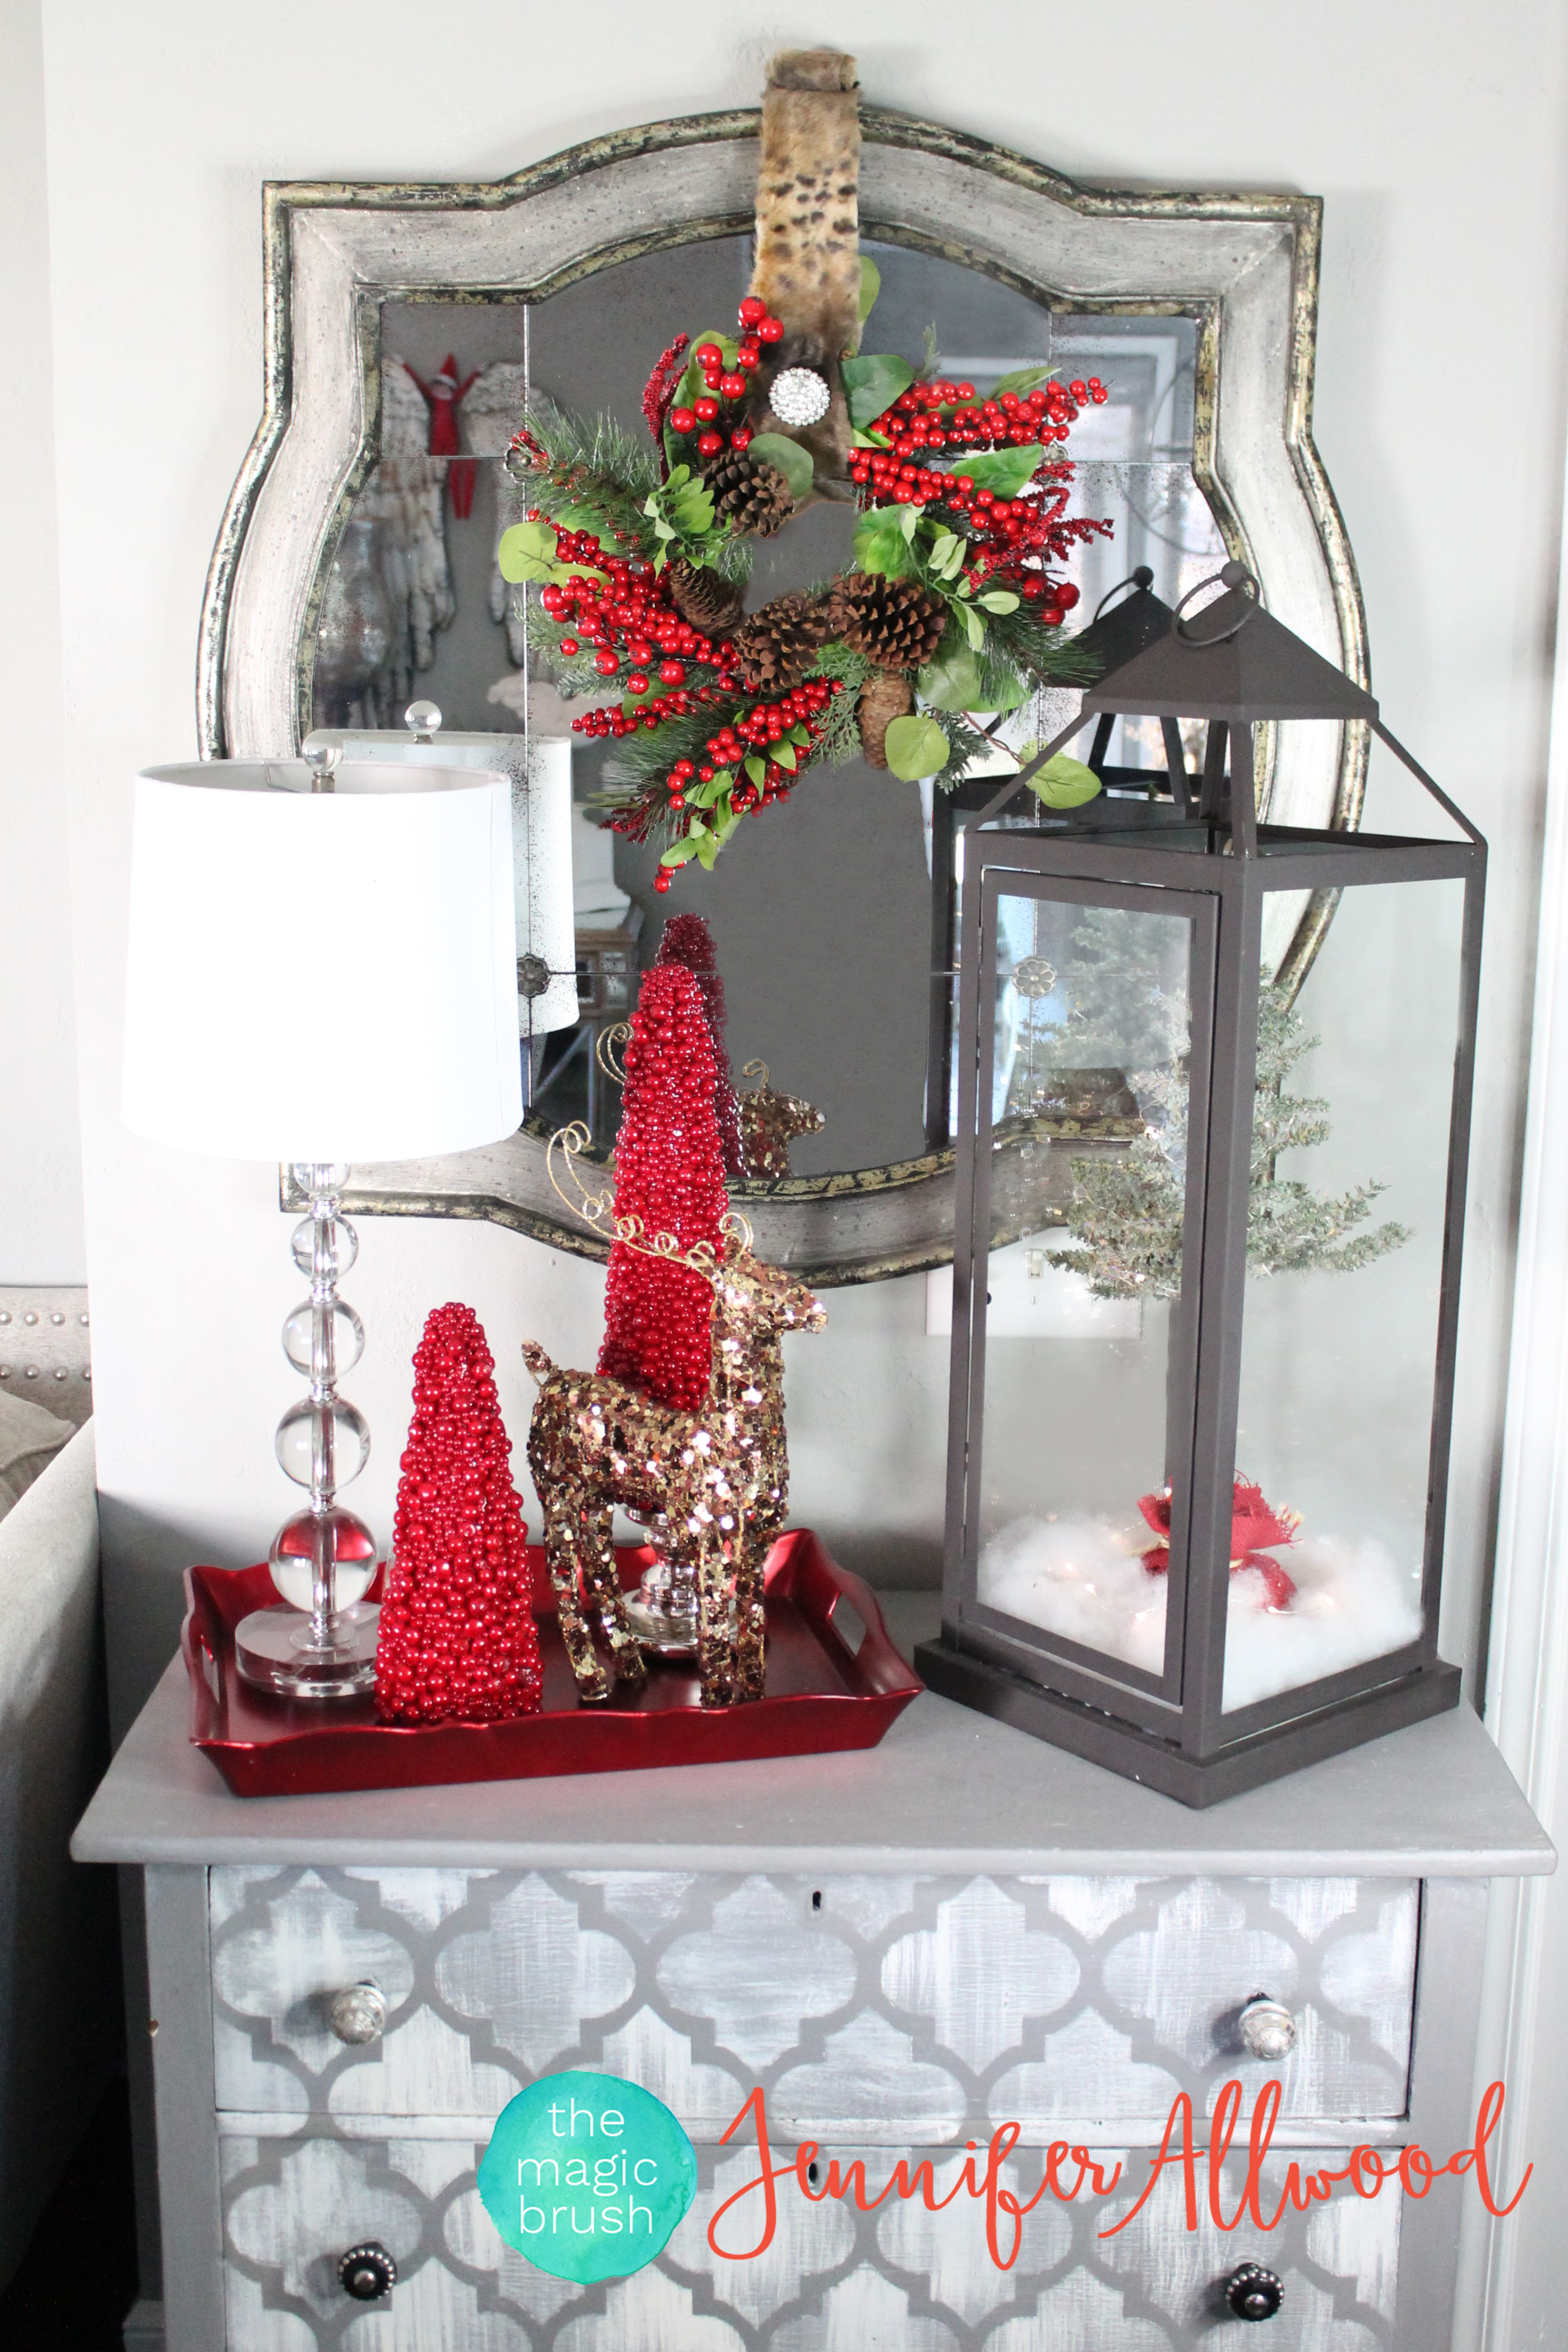 Christmas Decorations by Pier 1 | Magic Brush